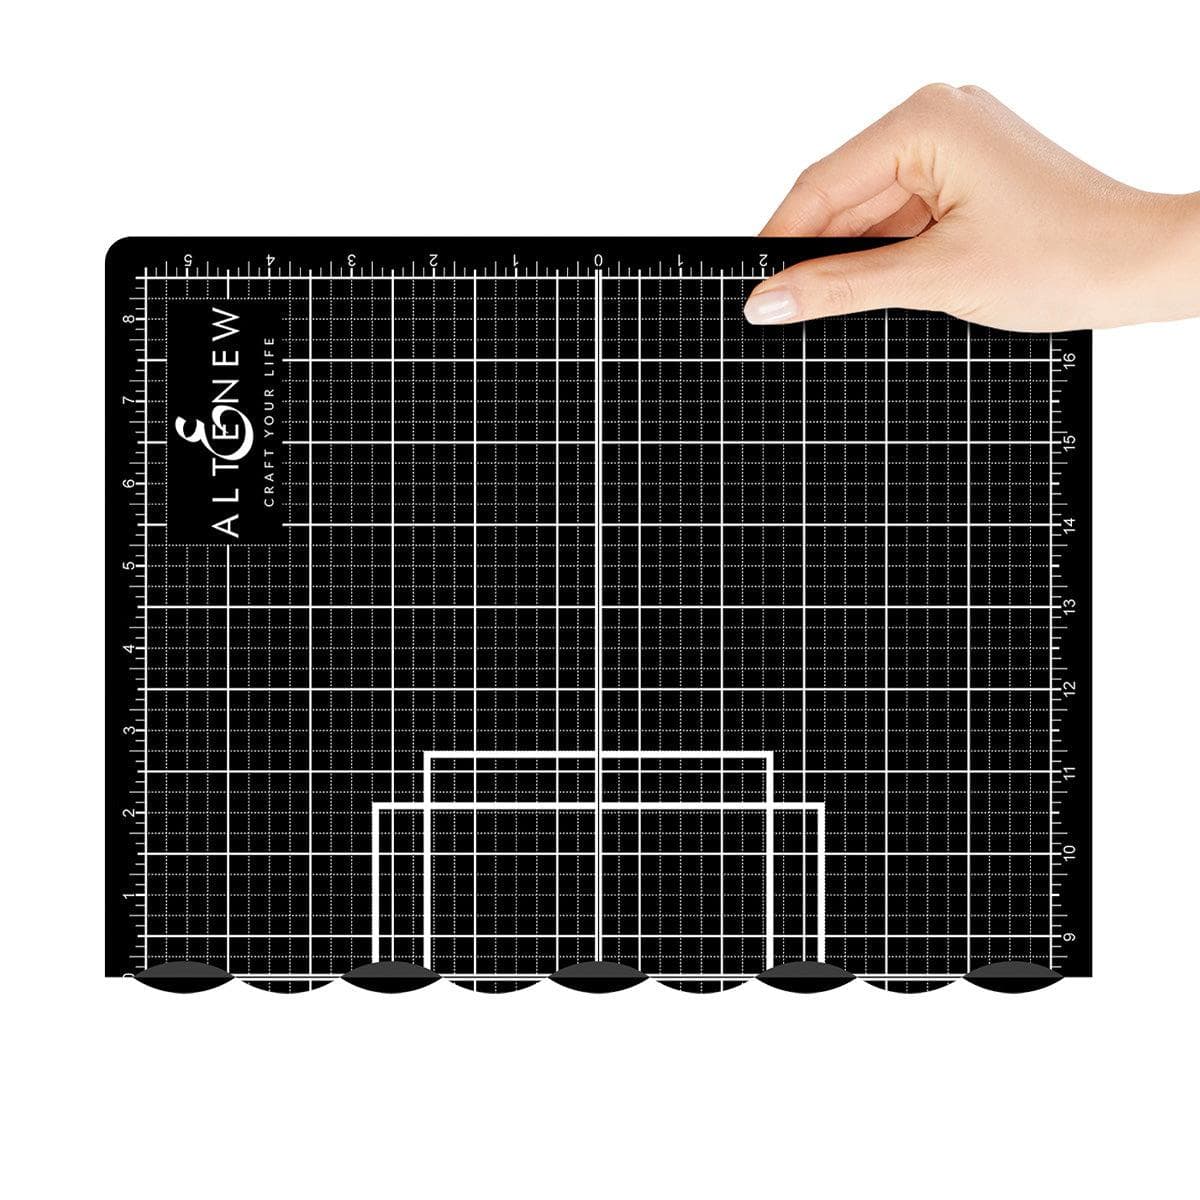 A3 Cutting Mat Grid Guide for crafts. Protect the work table